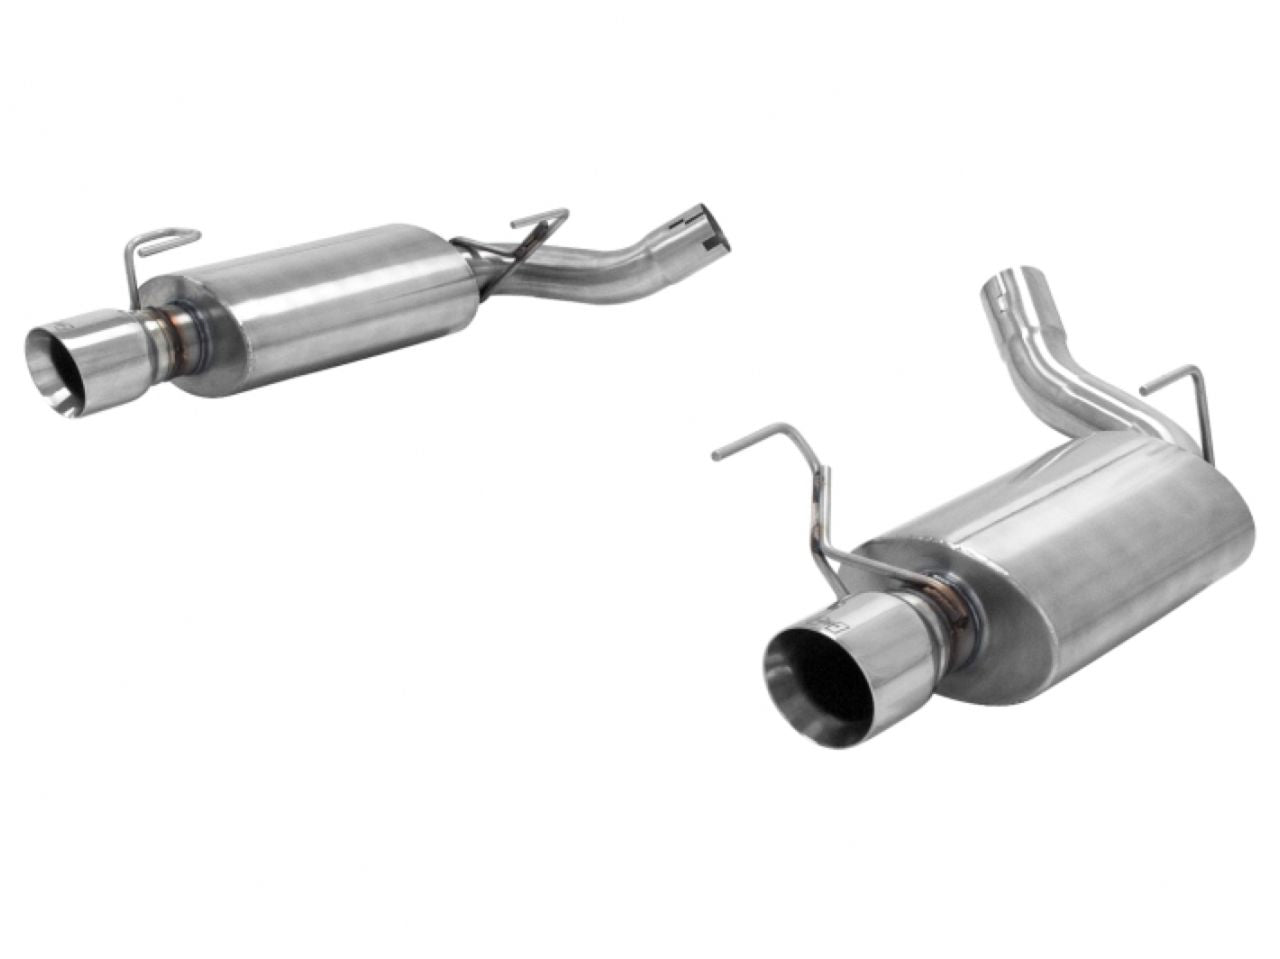 Hurst Shifters Axle Back Exhaust 6350021 Item Image